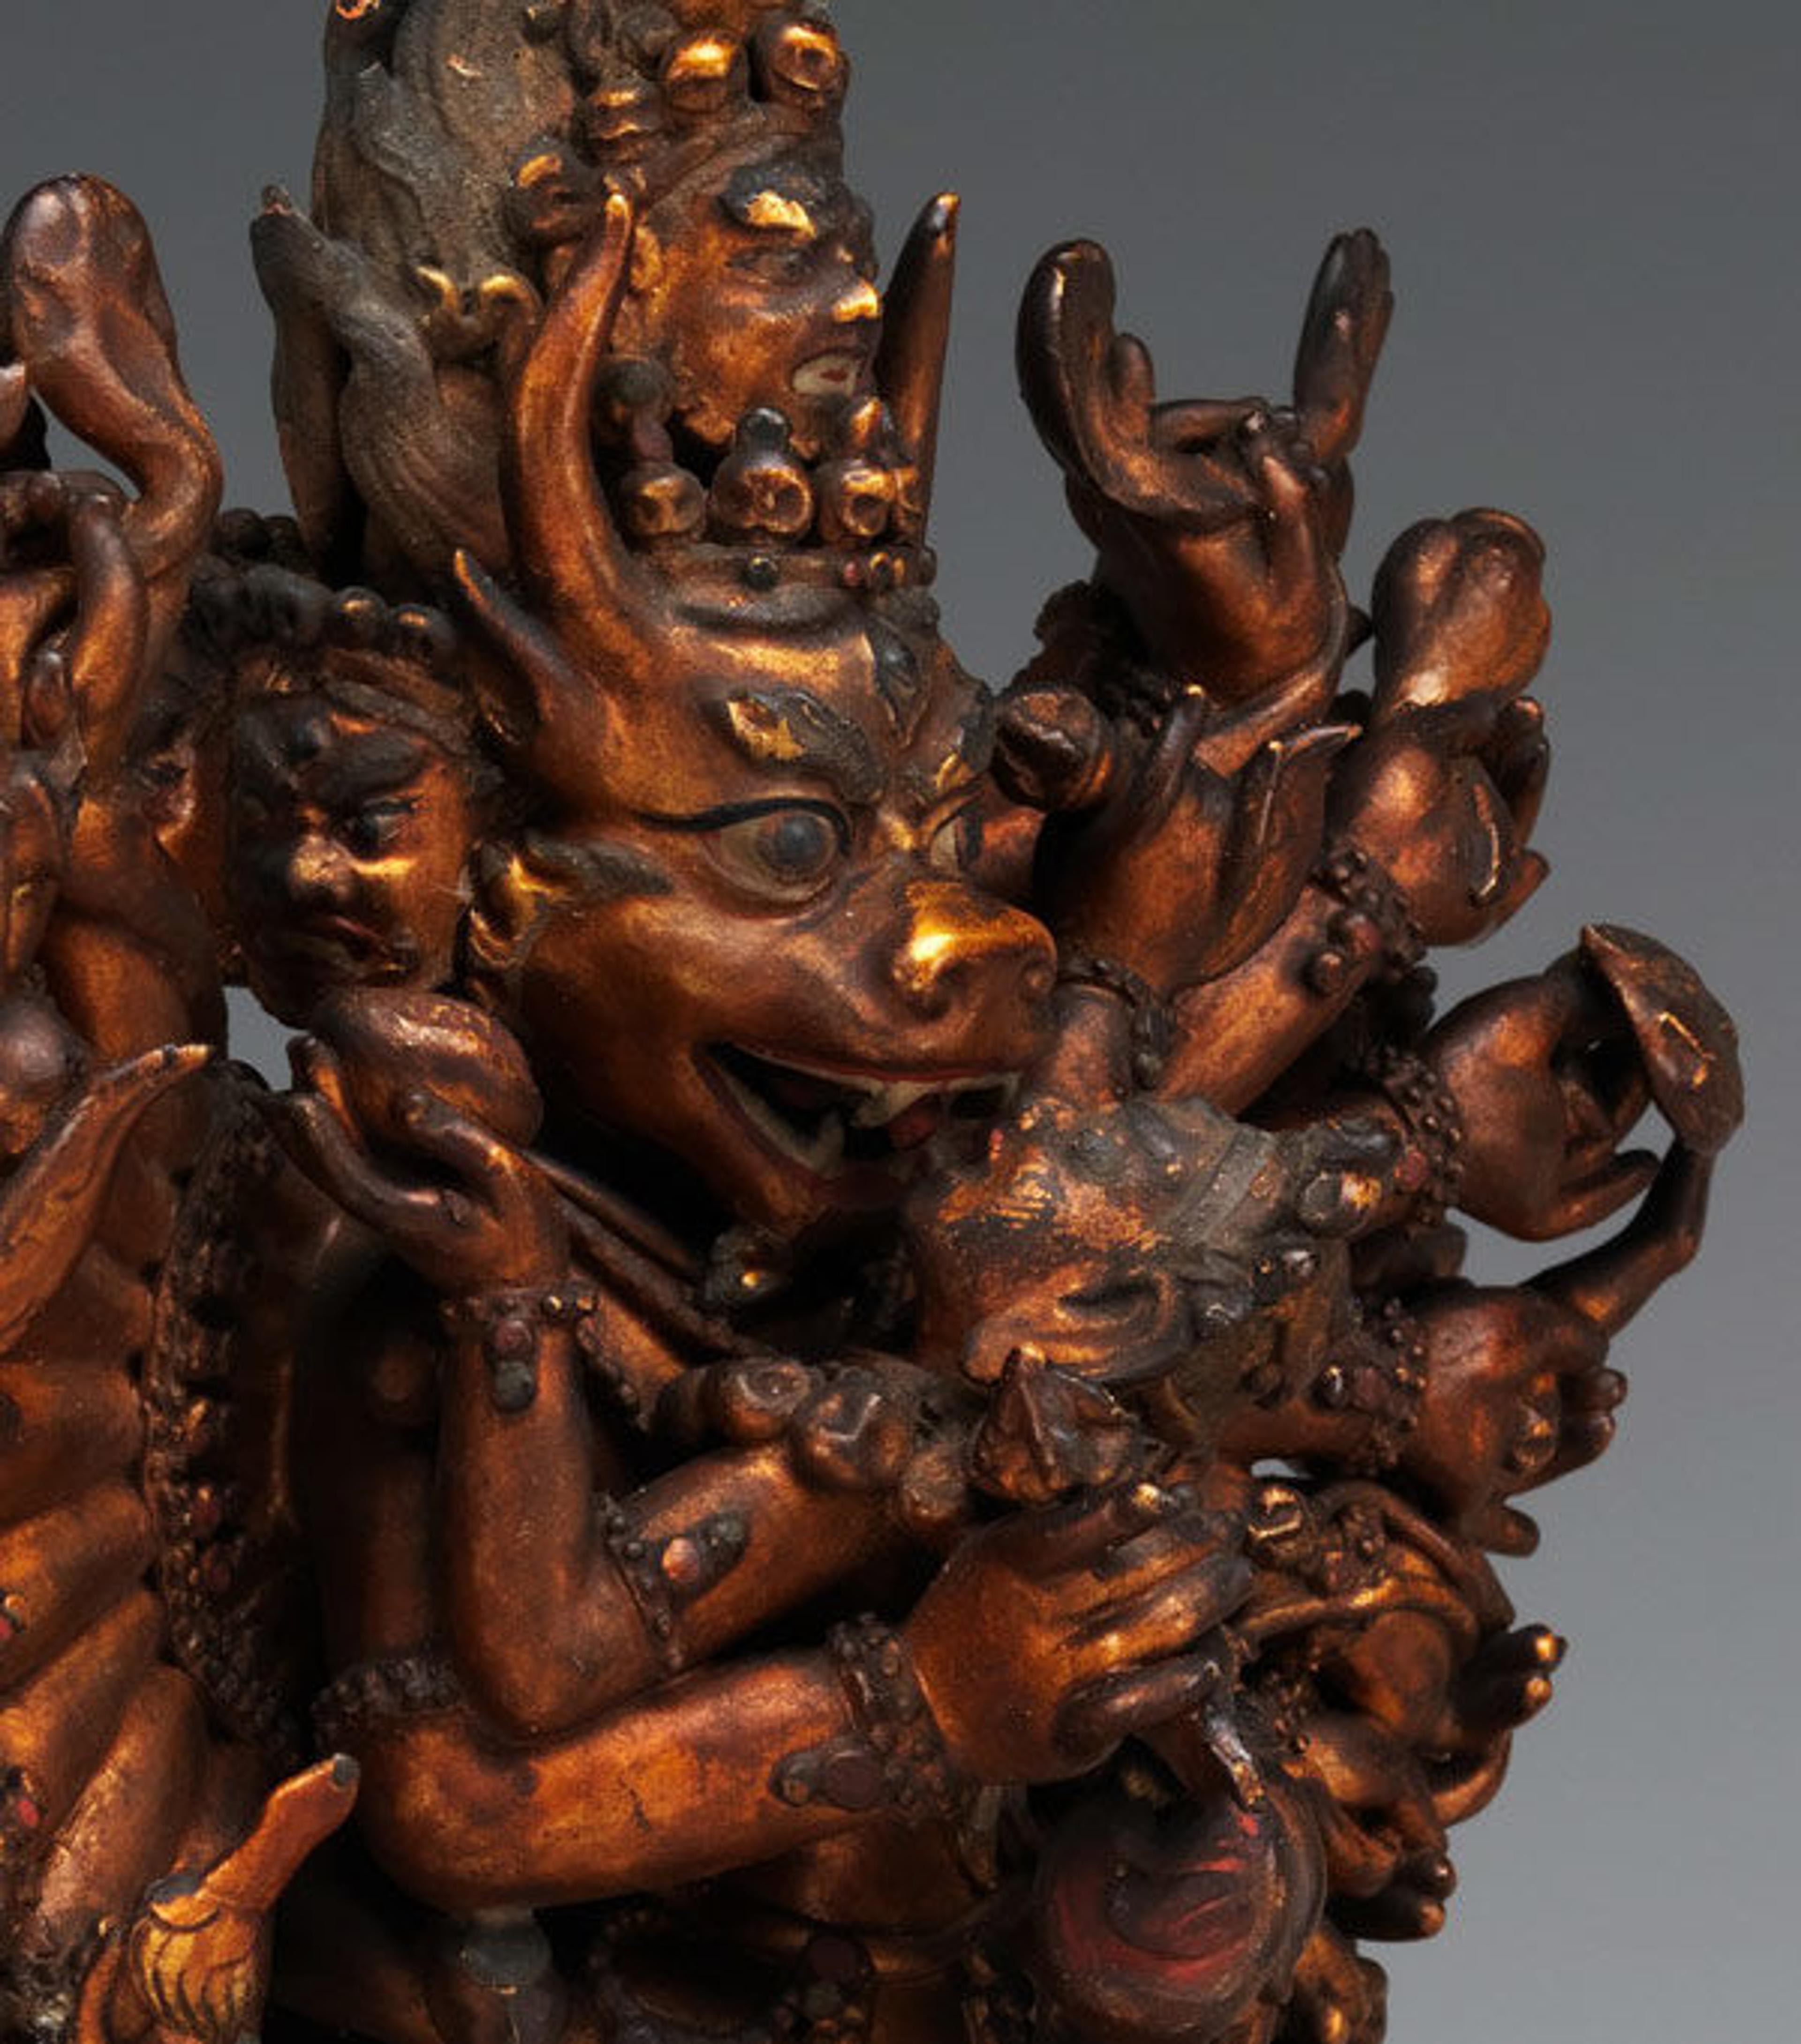 Vajrabhairava with His Consort Vajravetali (detail), 18th–19th century. Mongolia. Tung oil stucco, wood, gold, cinnabar, and other pigments; 7 1/2 x 6 in. (19.1 x 15.2 cm). The Metropolitan Museum of Art, New York, Bequest of Kate Read Blacque, in memory of her husband, Valentine Alexander Blacque, by exchange, 1948 (48.30.14)